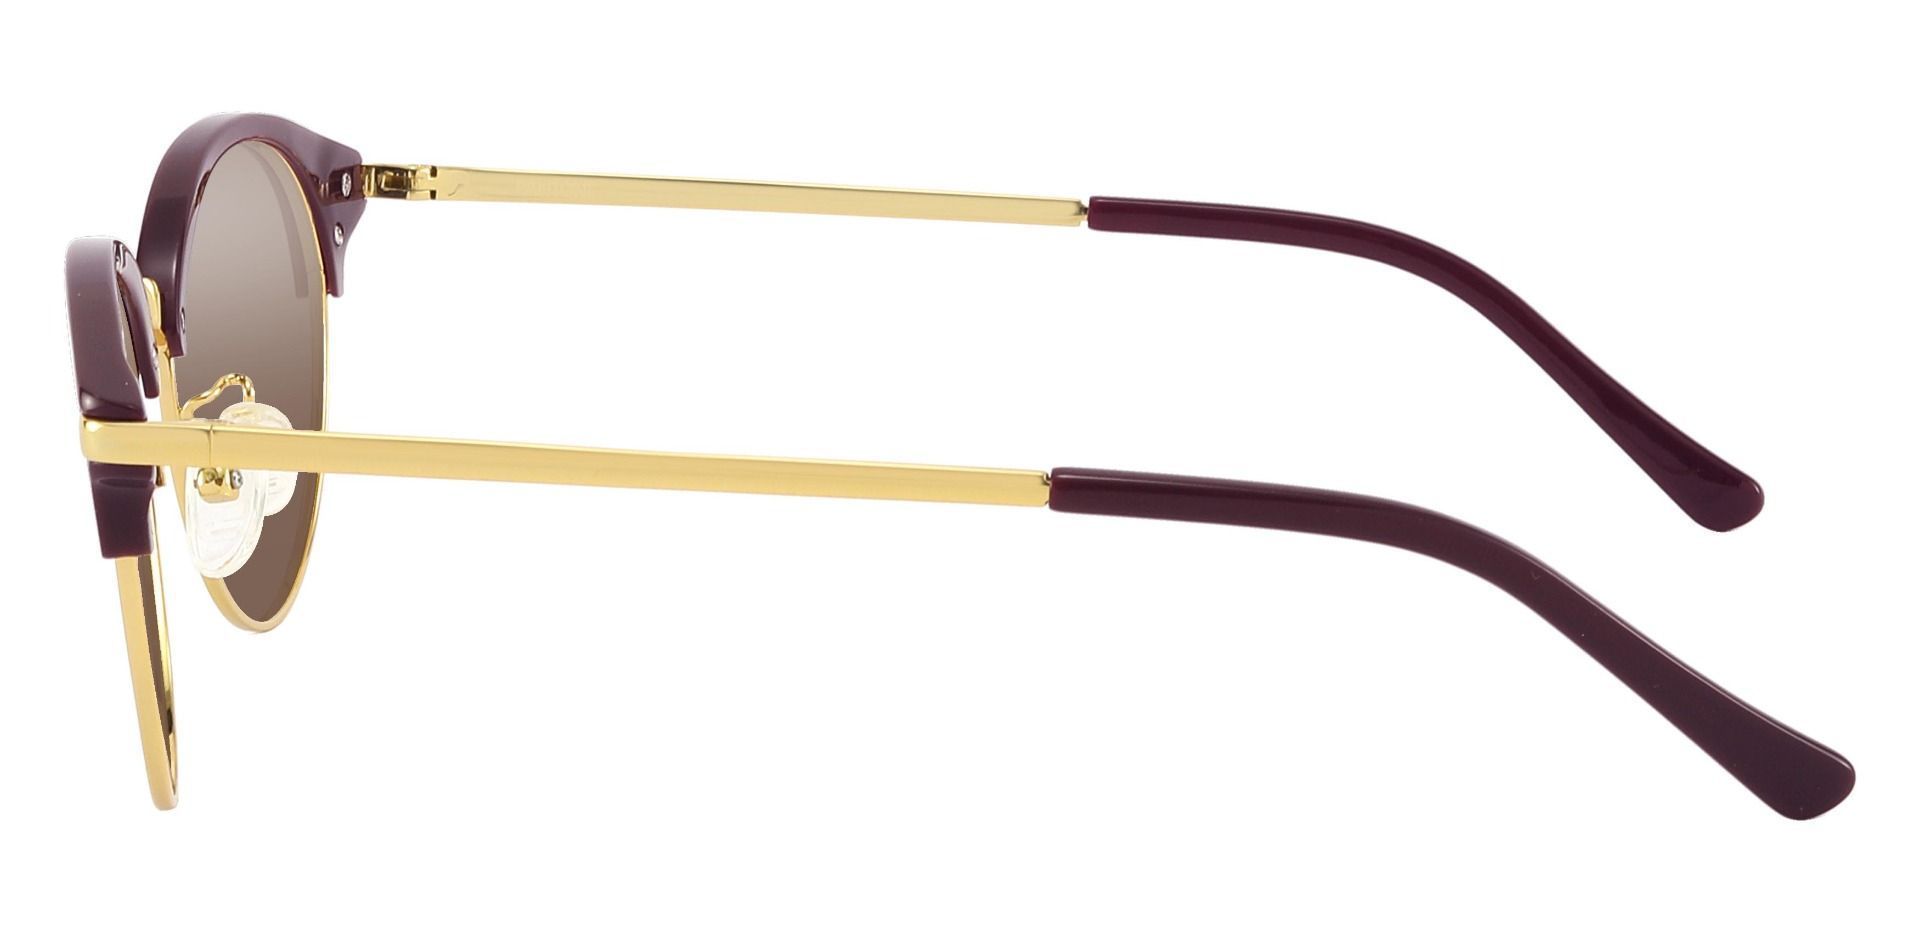 Catskill Browline Lined Bifocal Sunglasses - Purple Frame With Brown Lenses